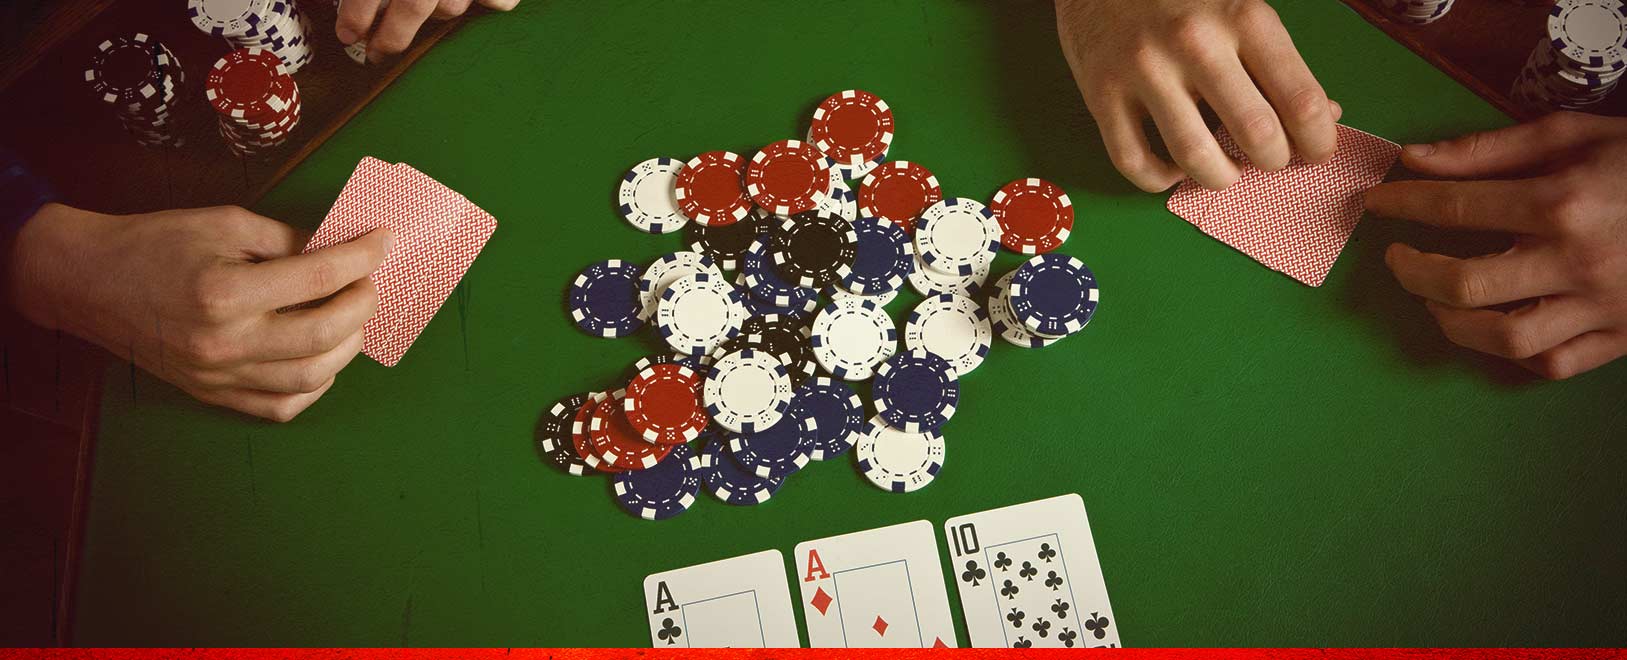 Poker Strategy: Five Reasons to Call in Online Poker